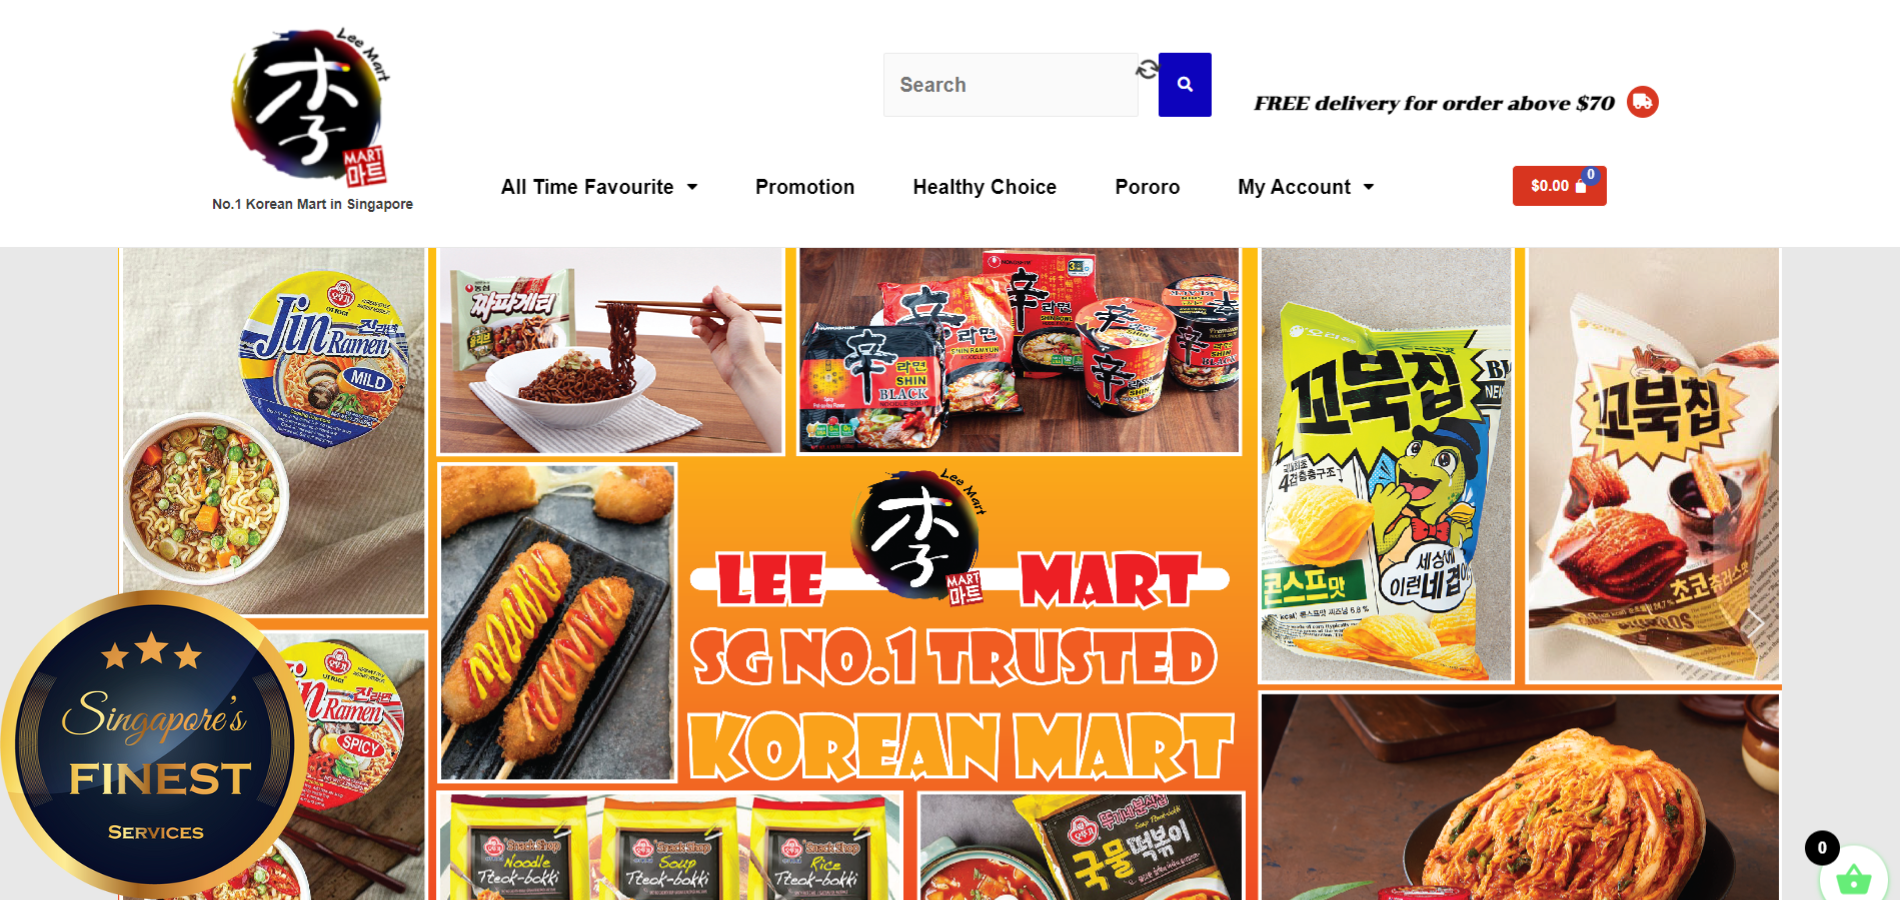 The Finest Korean Marts in Singapore